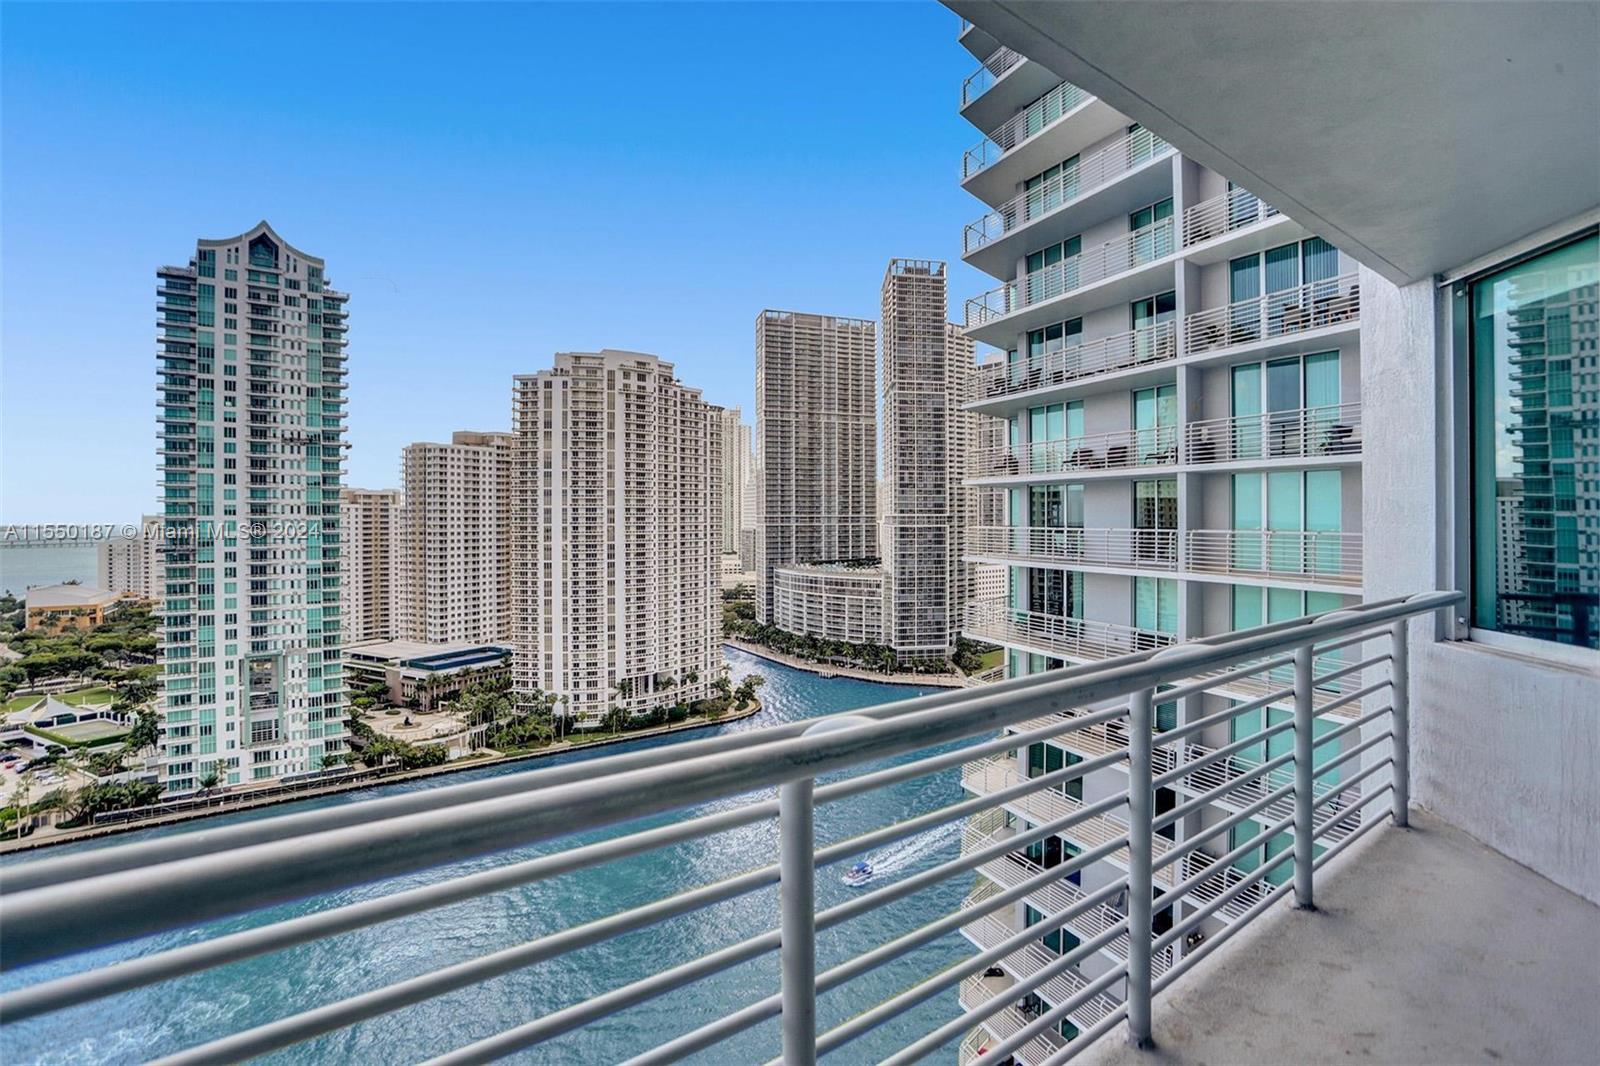 Amazing million dollar views of Biscayne Bay and skyline from most sought after 2/2 line in One Miami East ("01'). Unit has been totally renovated! Building Amenities include - 2 swimming pools, jacuzzi , 2 party rooms, sundeck, sauna, fitness centers, convenience store, 24hrs security, valet, & concierge. Enjoy living in the city, walking distance from Whole Foods, restaurants, metro mover & Bayfront Park. Minutes from South Beach, Airport, Coral Gables and much more. Fabulous fine dining at Il Gabiano, conveniently located within the building. Location is perfect - walking distance to downtown's restaurants and shops and to Brickell.